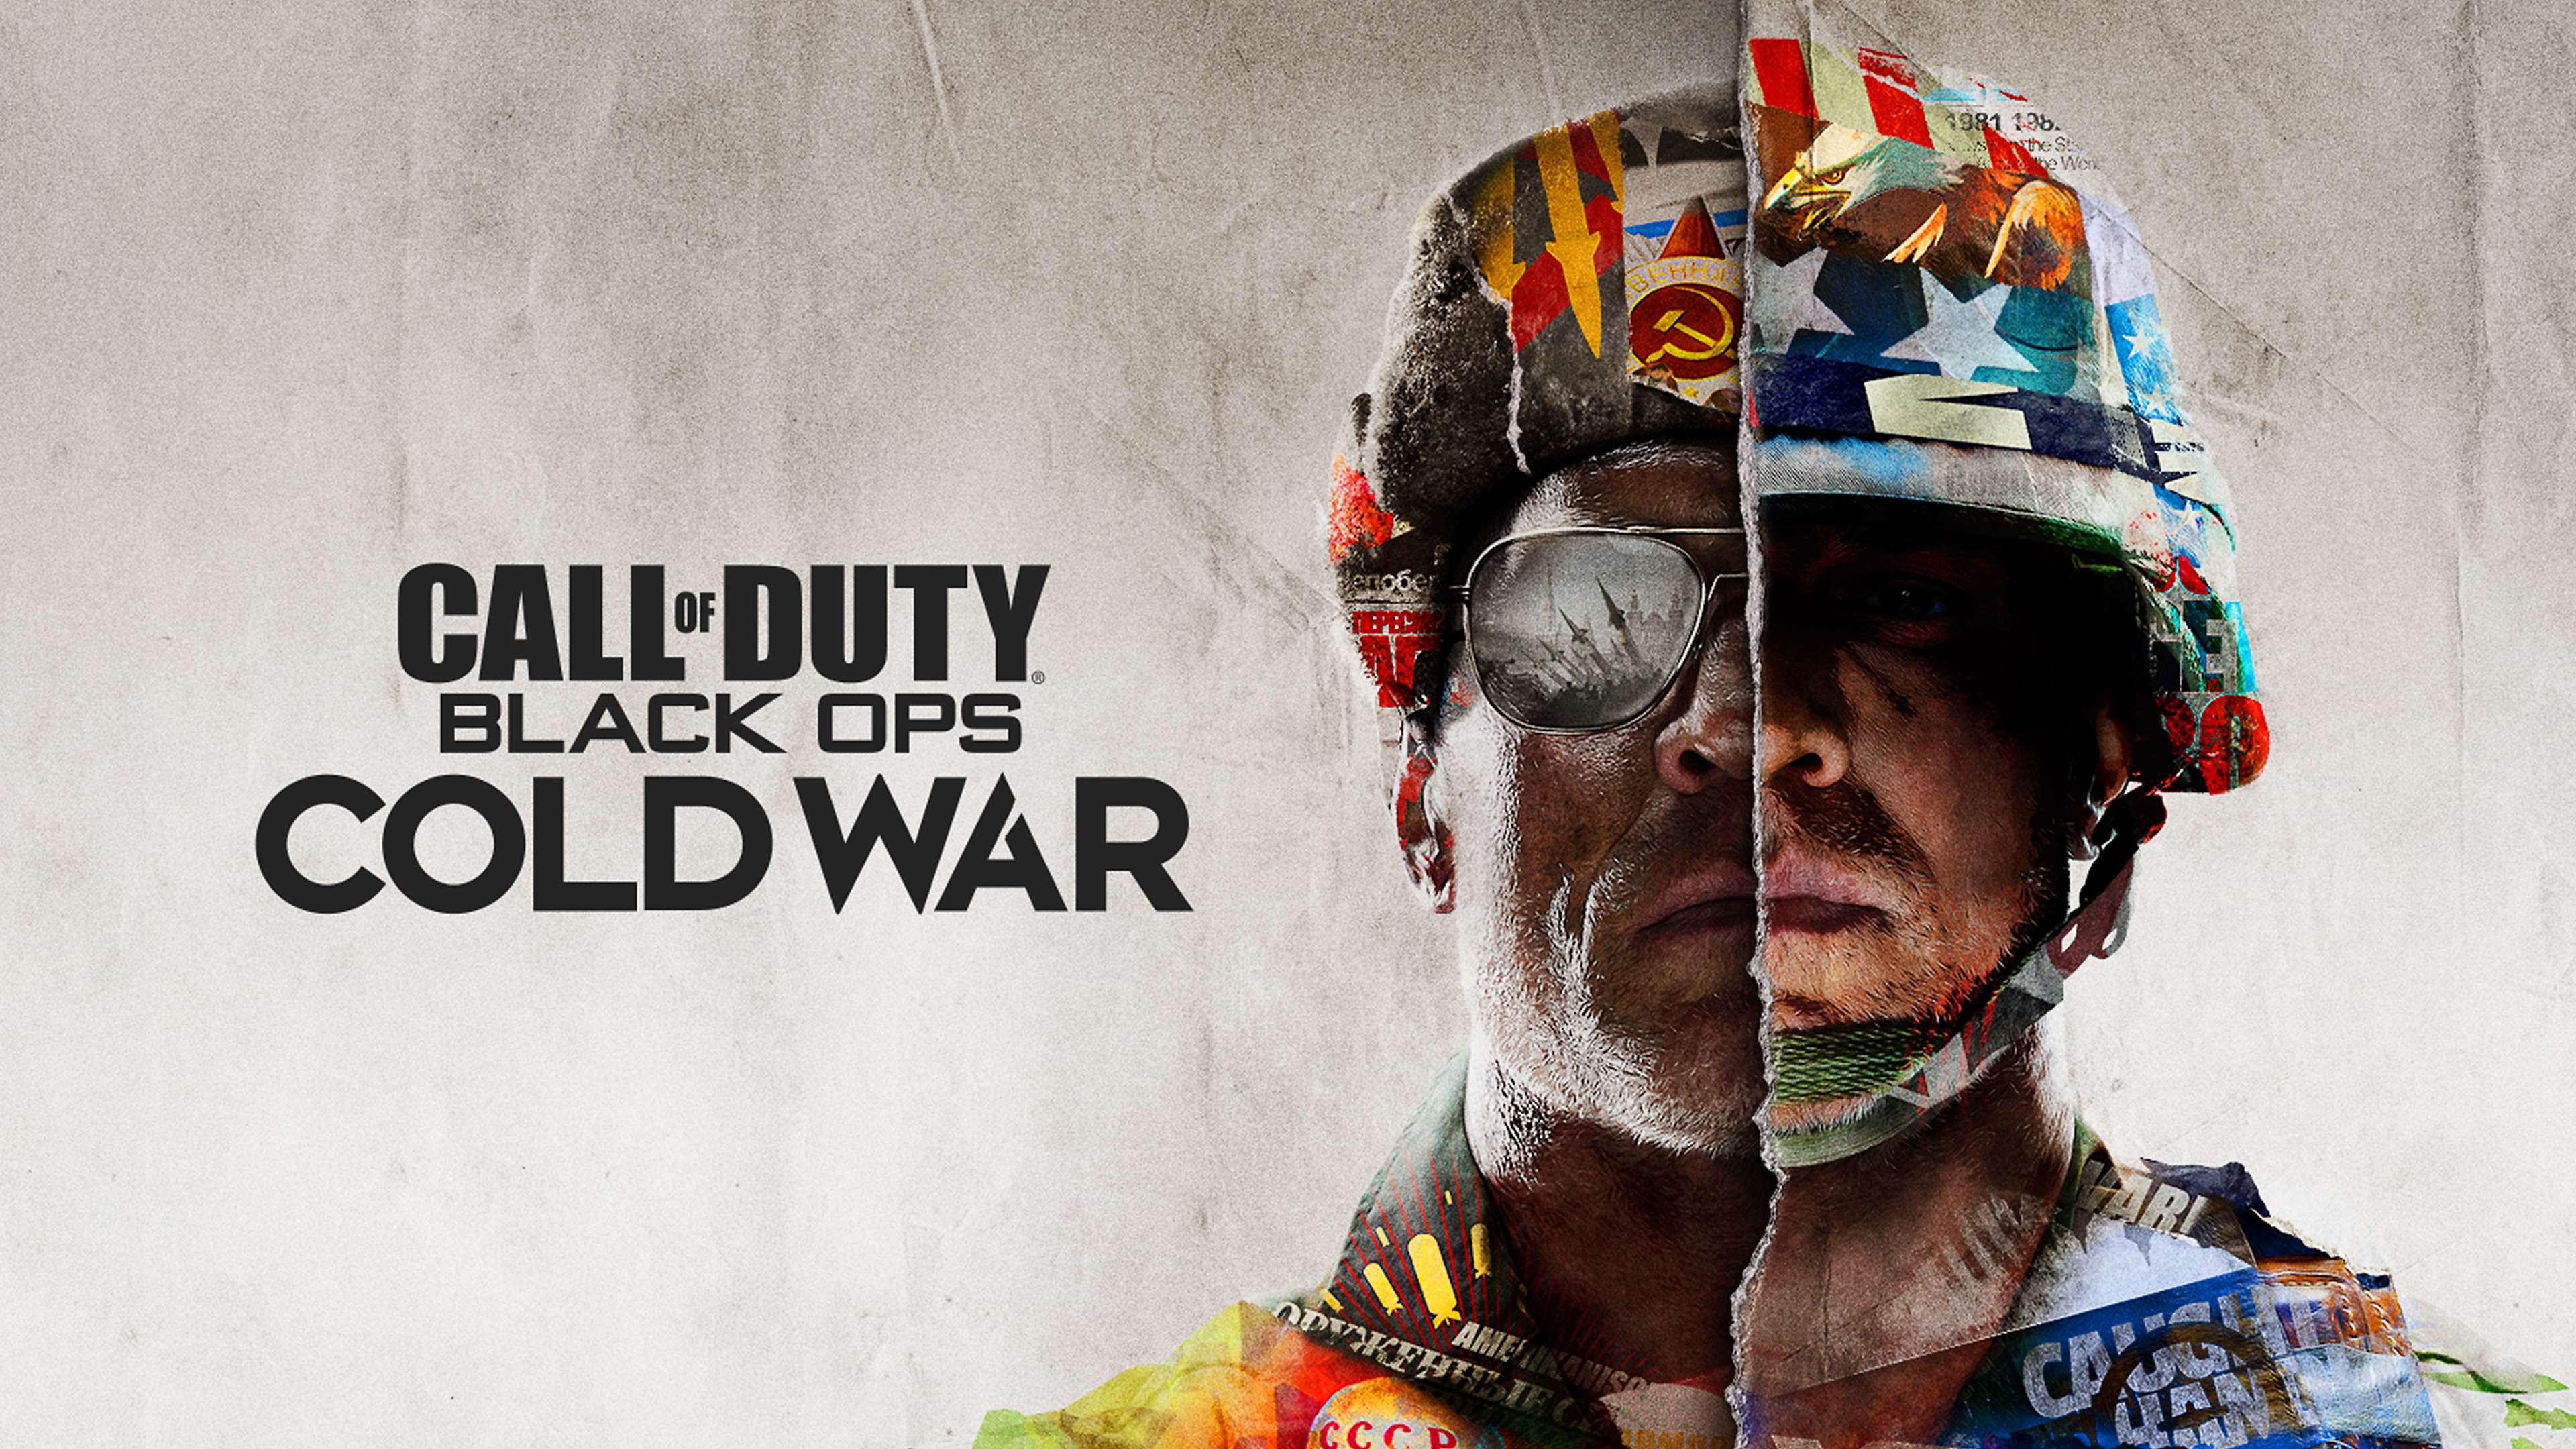 Call of Duty®: Black Ops Cold War trailer